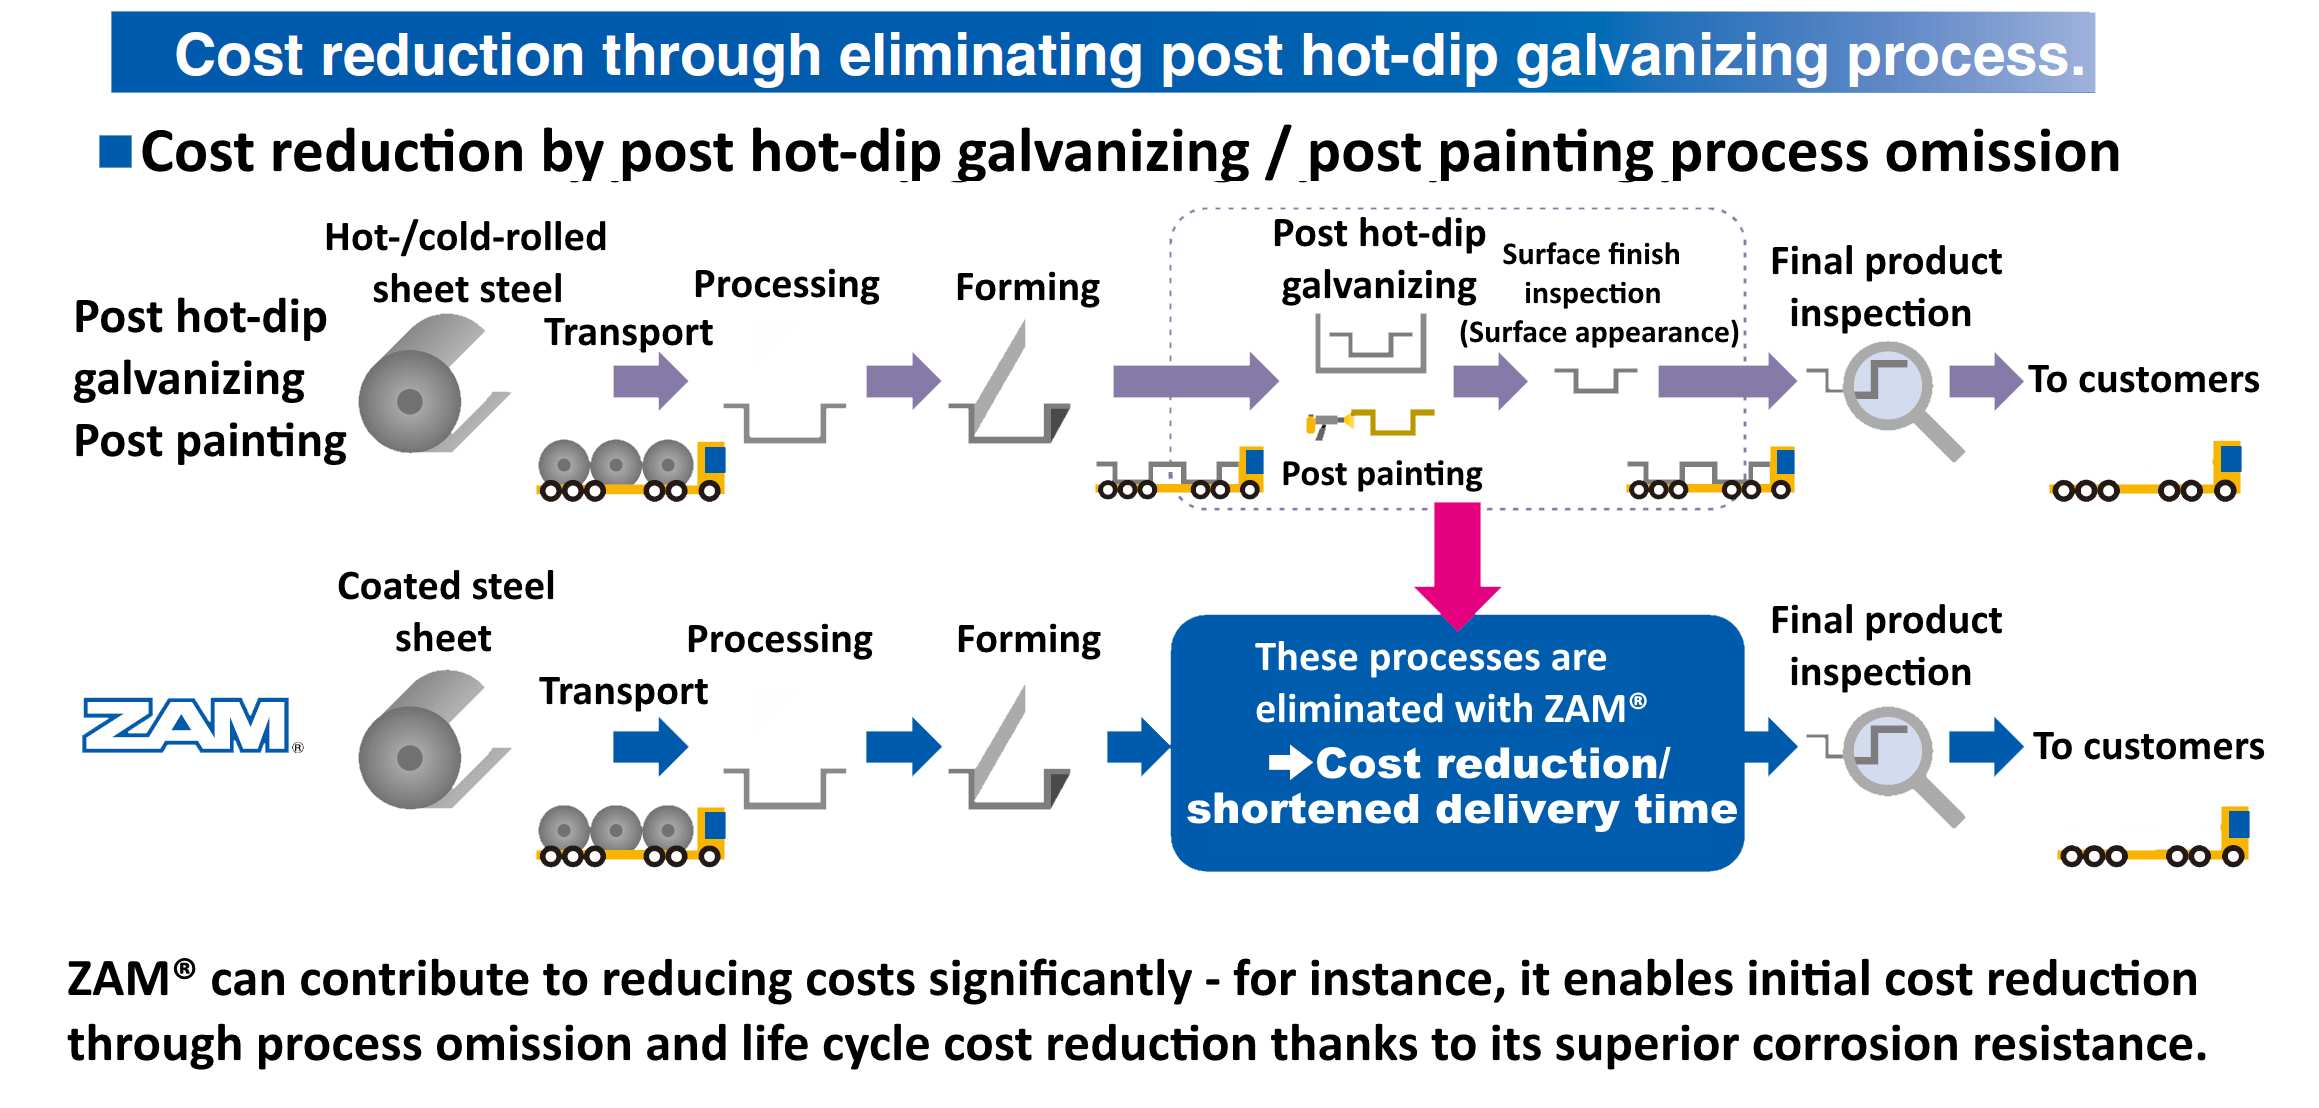 Cost reduction by elimination of post dip galvanizing and post painting